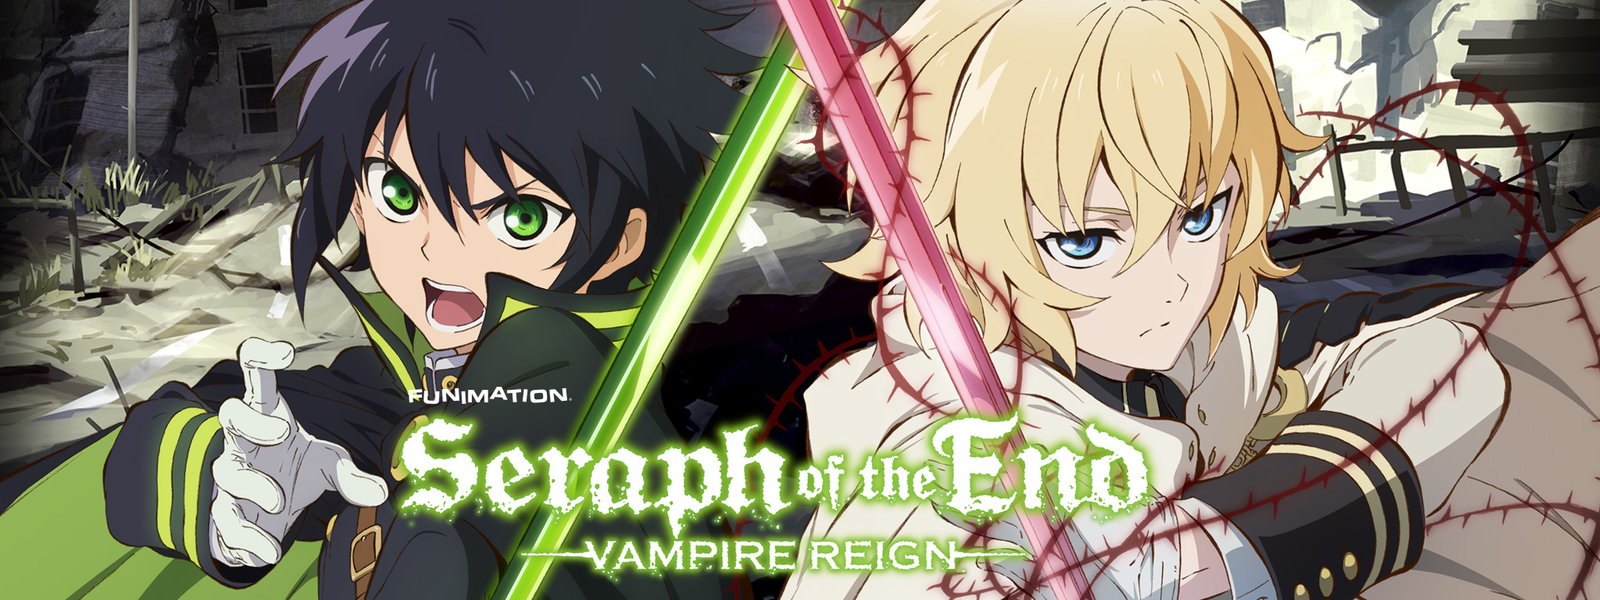 Seraph Of The End #18